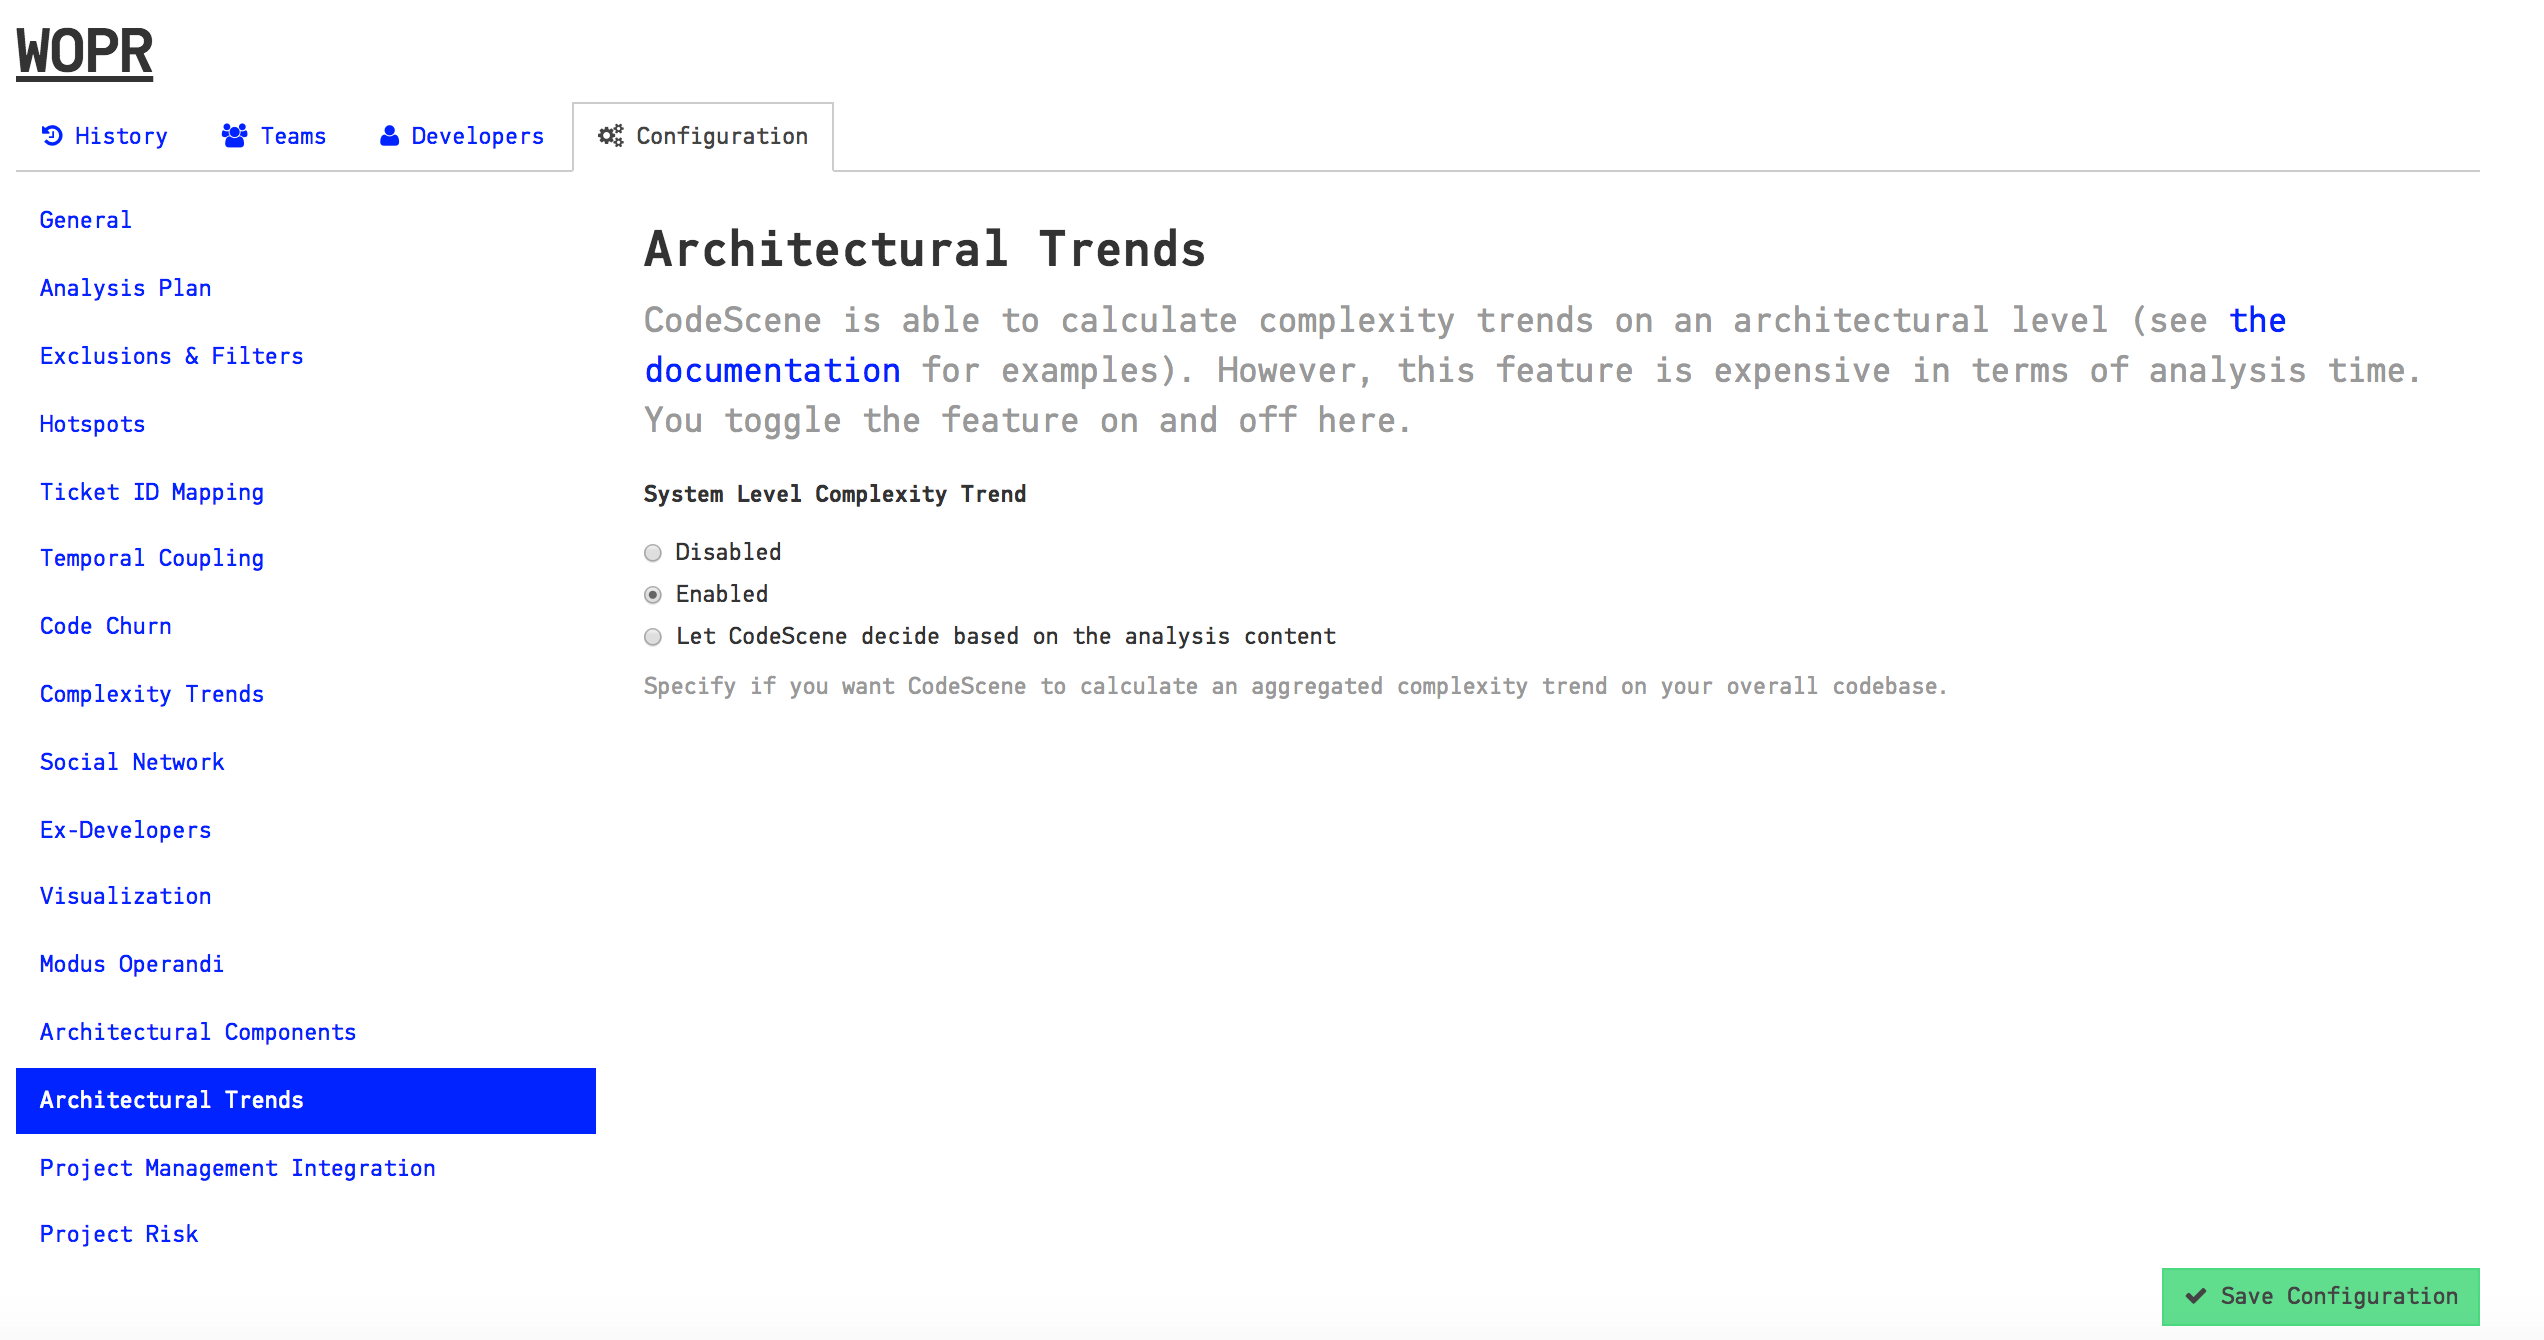 Enable Architectural Trends